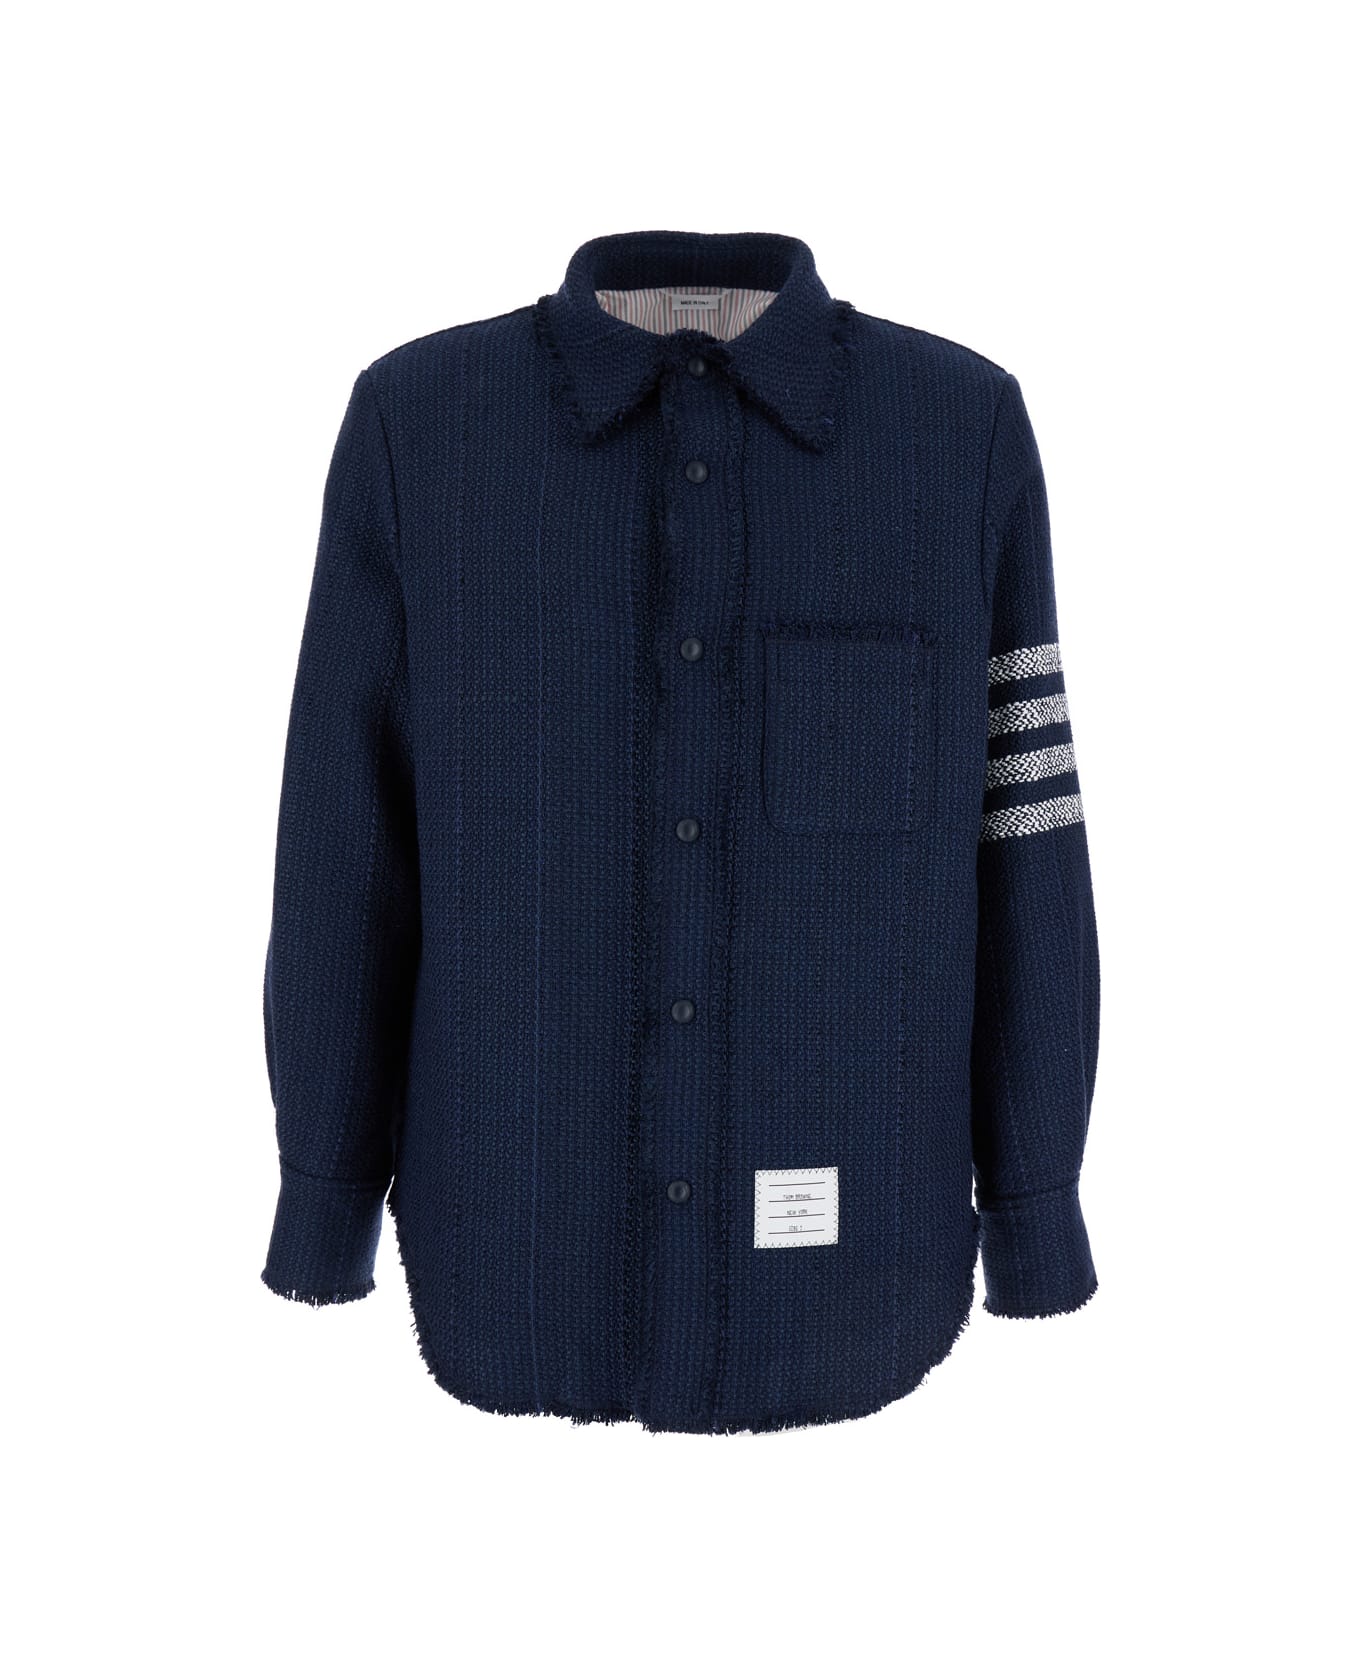 Thom Browne Snap Front Shirt Jacket W/fray Edge In Woven 4 Bar Solid Cotton Tweed - Blu